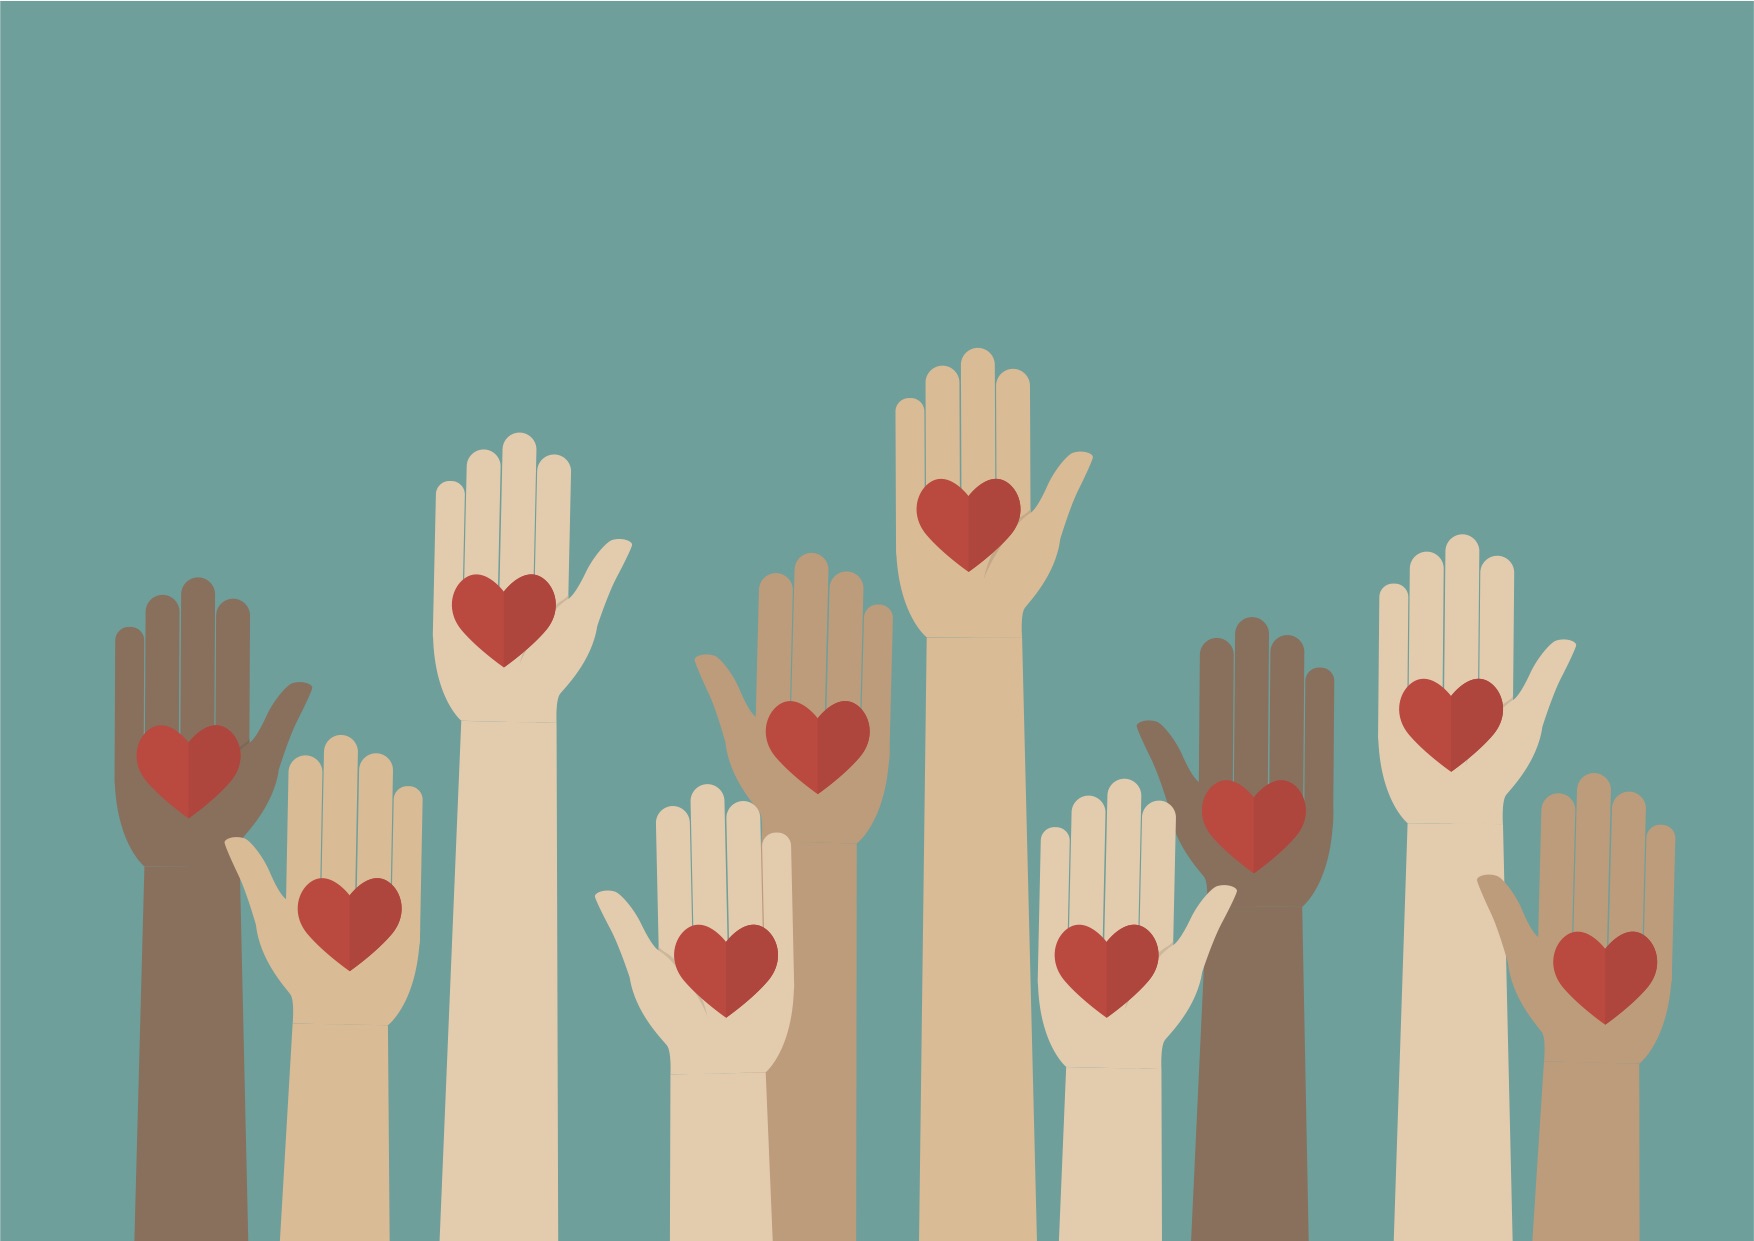 Raised hands with hearts in the middle of them set against a teal background.